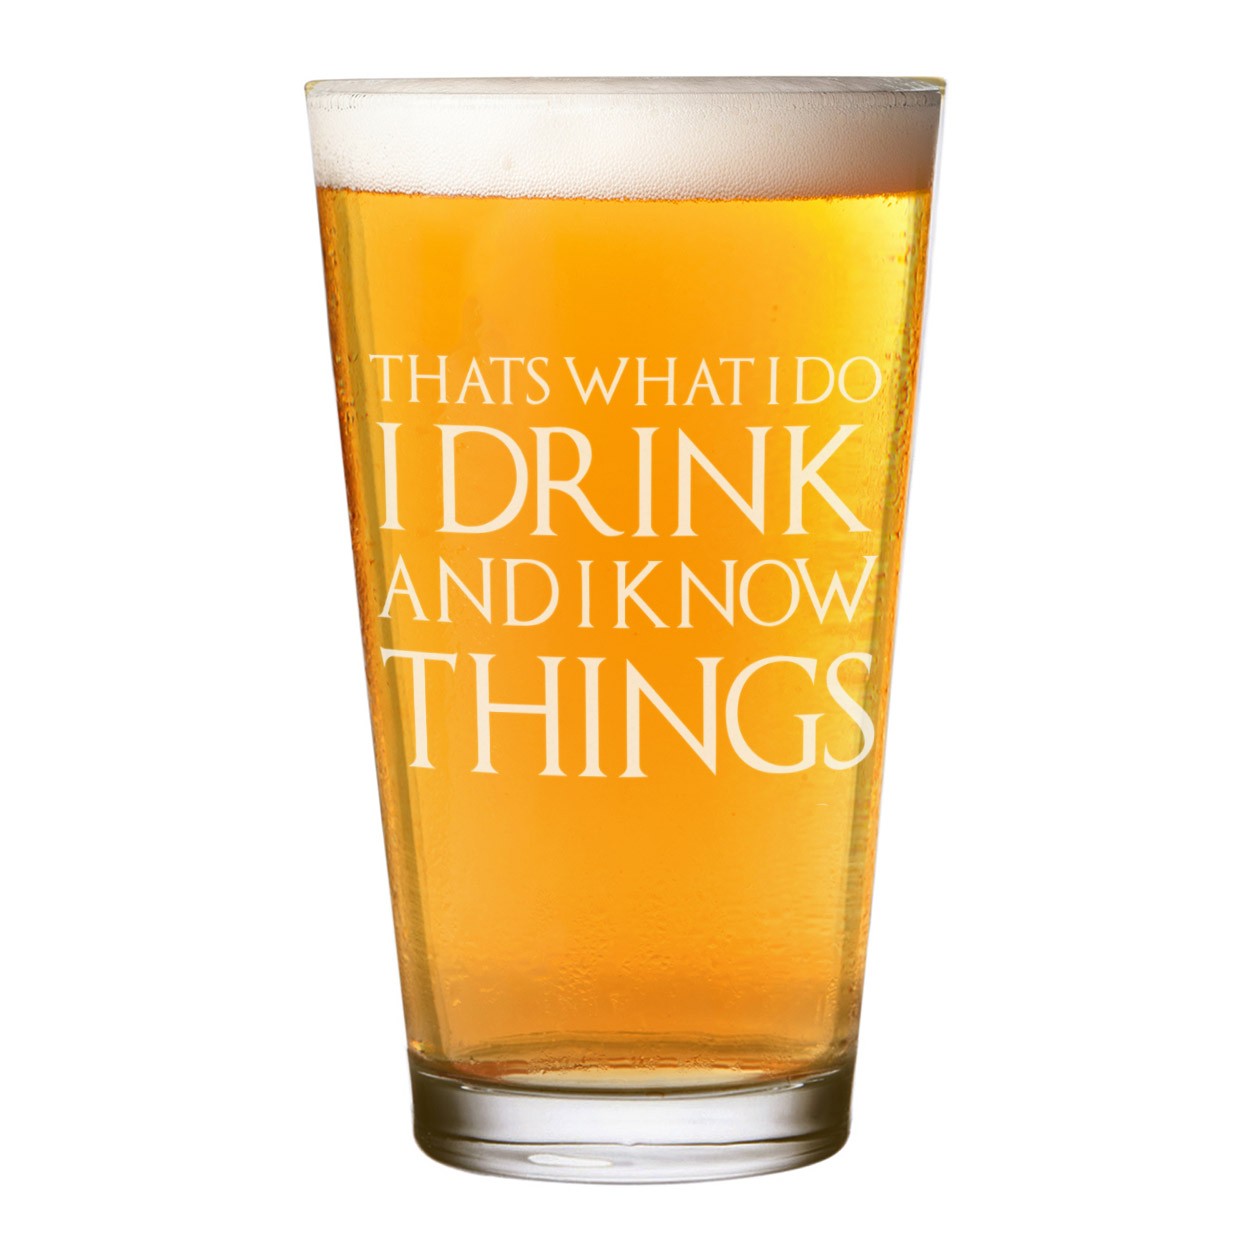 That's What I Do I Drink And I Know Things Shaker Pint Glass Craft Beer Cider